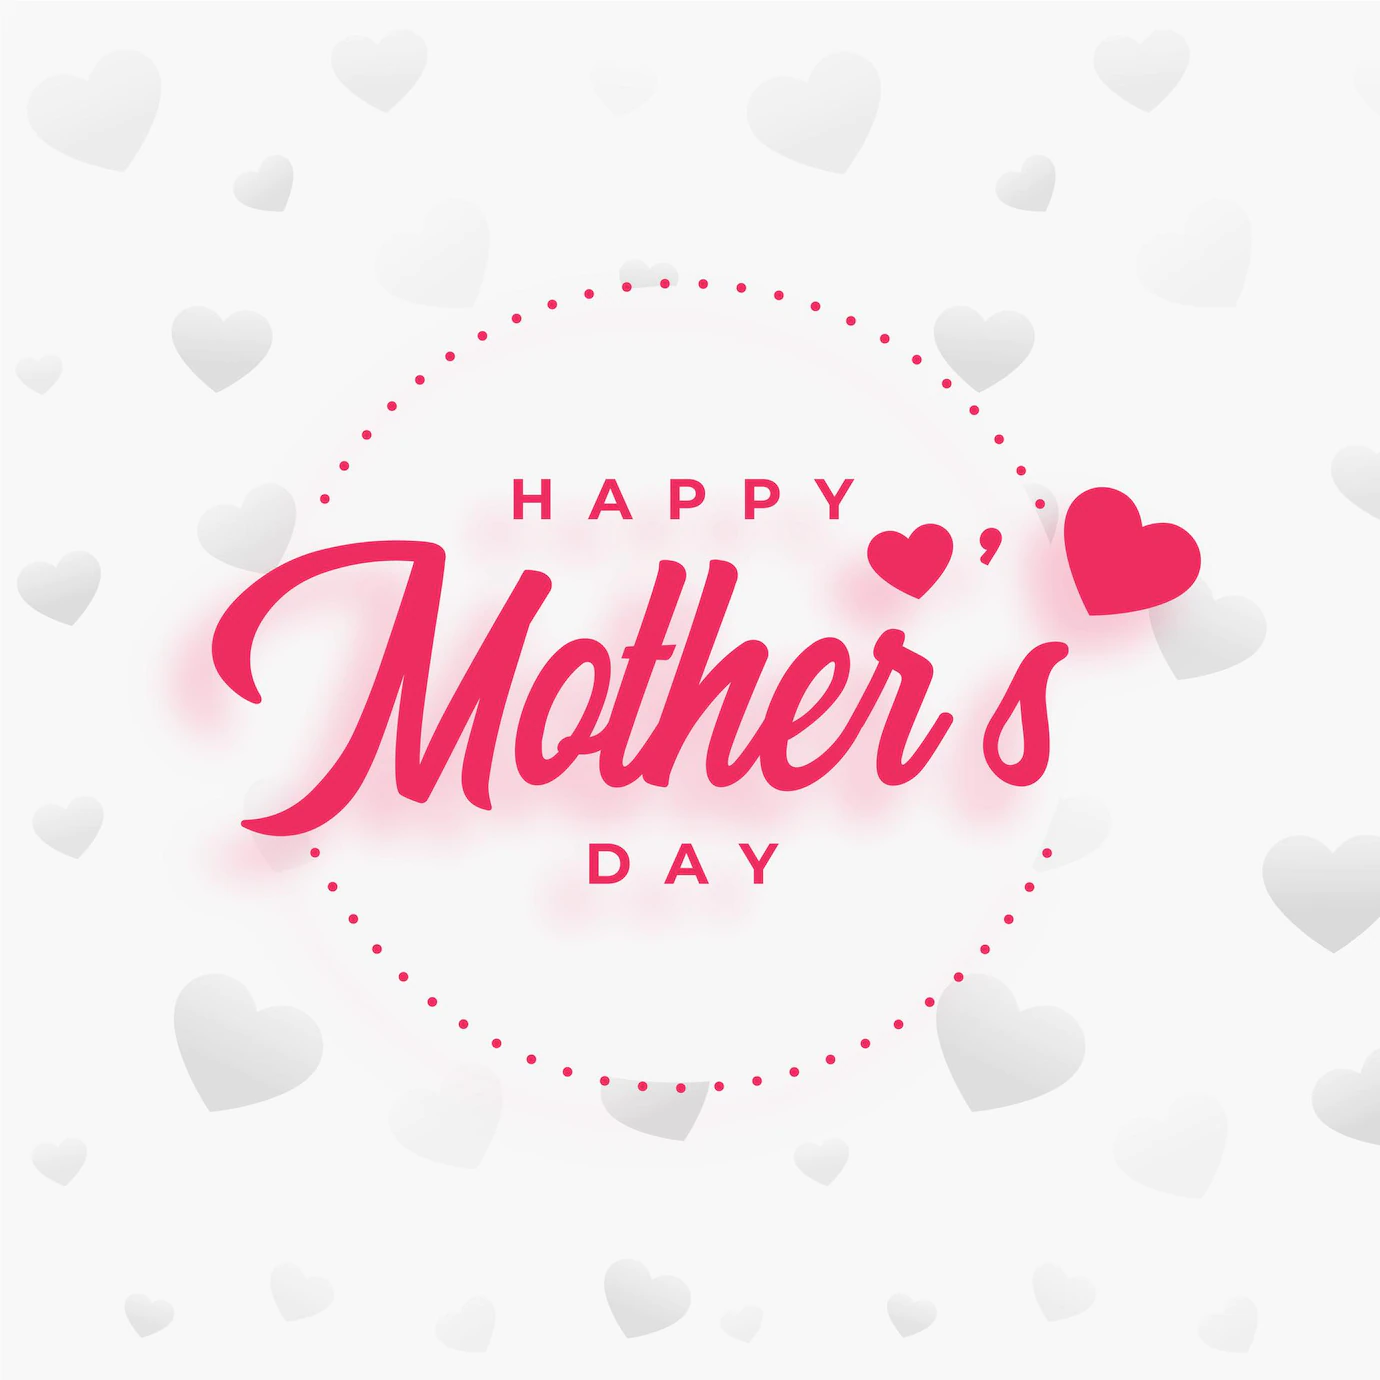 Mothers Day Poster Design Wishes Background 1017 31604